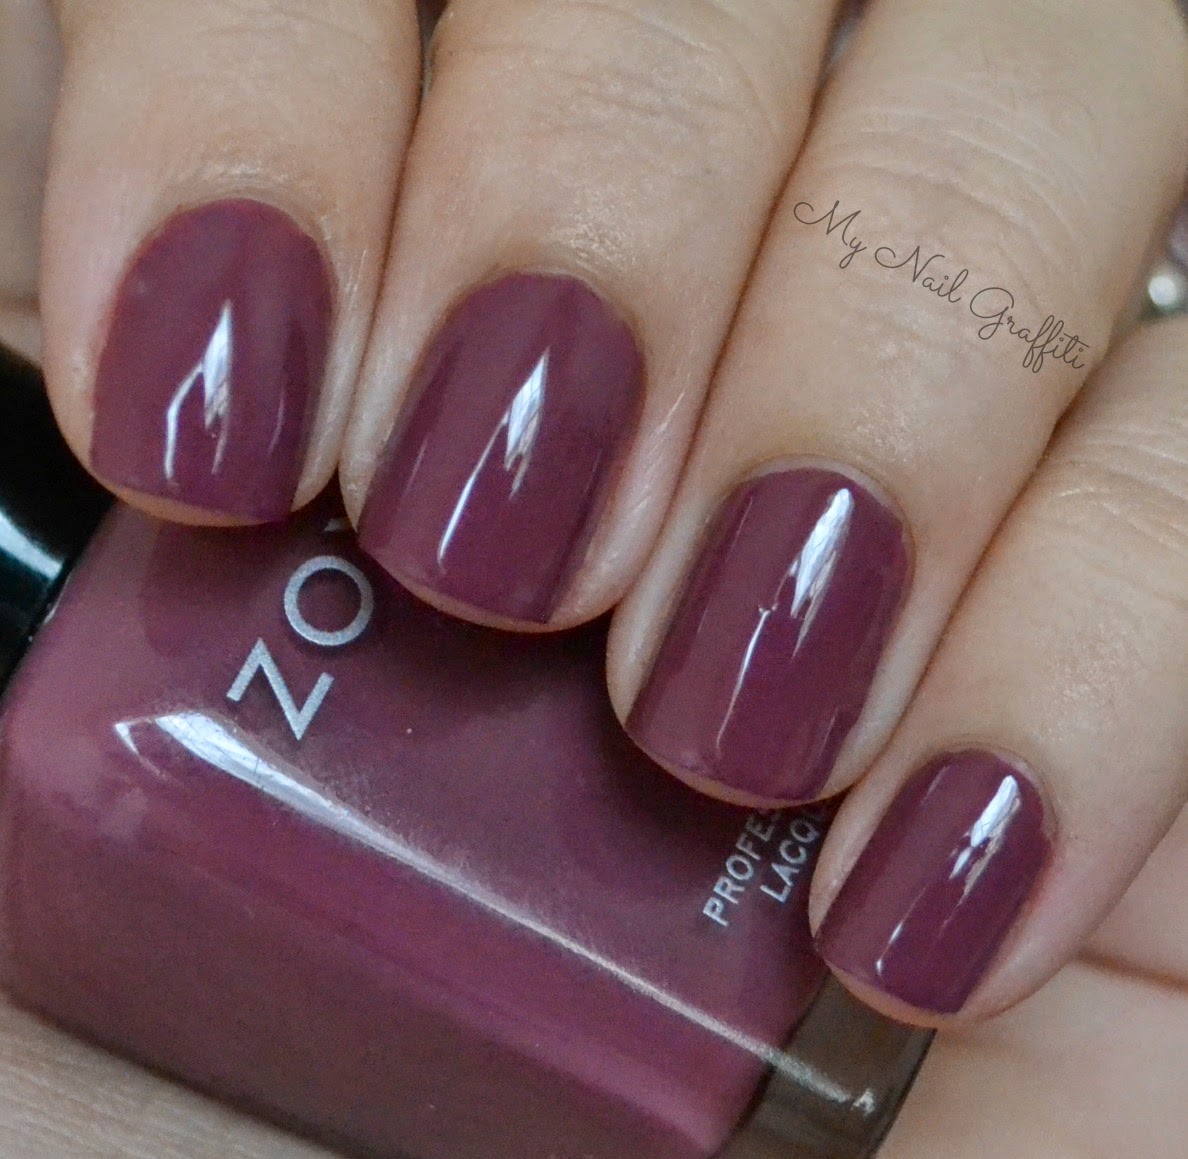 My Nail Graffiti: Zoya Naturel Deux (2) Collection Swatches and Review